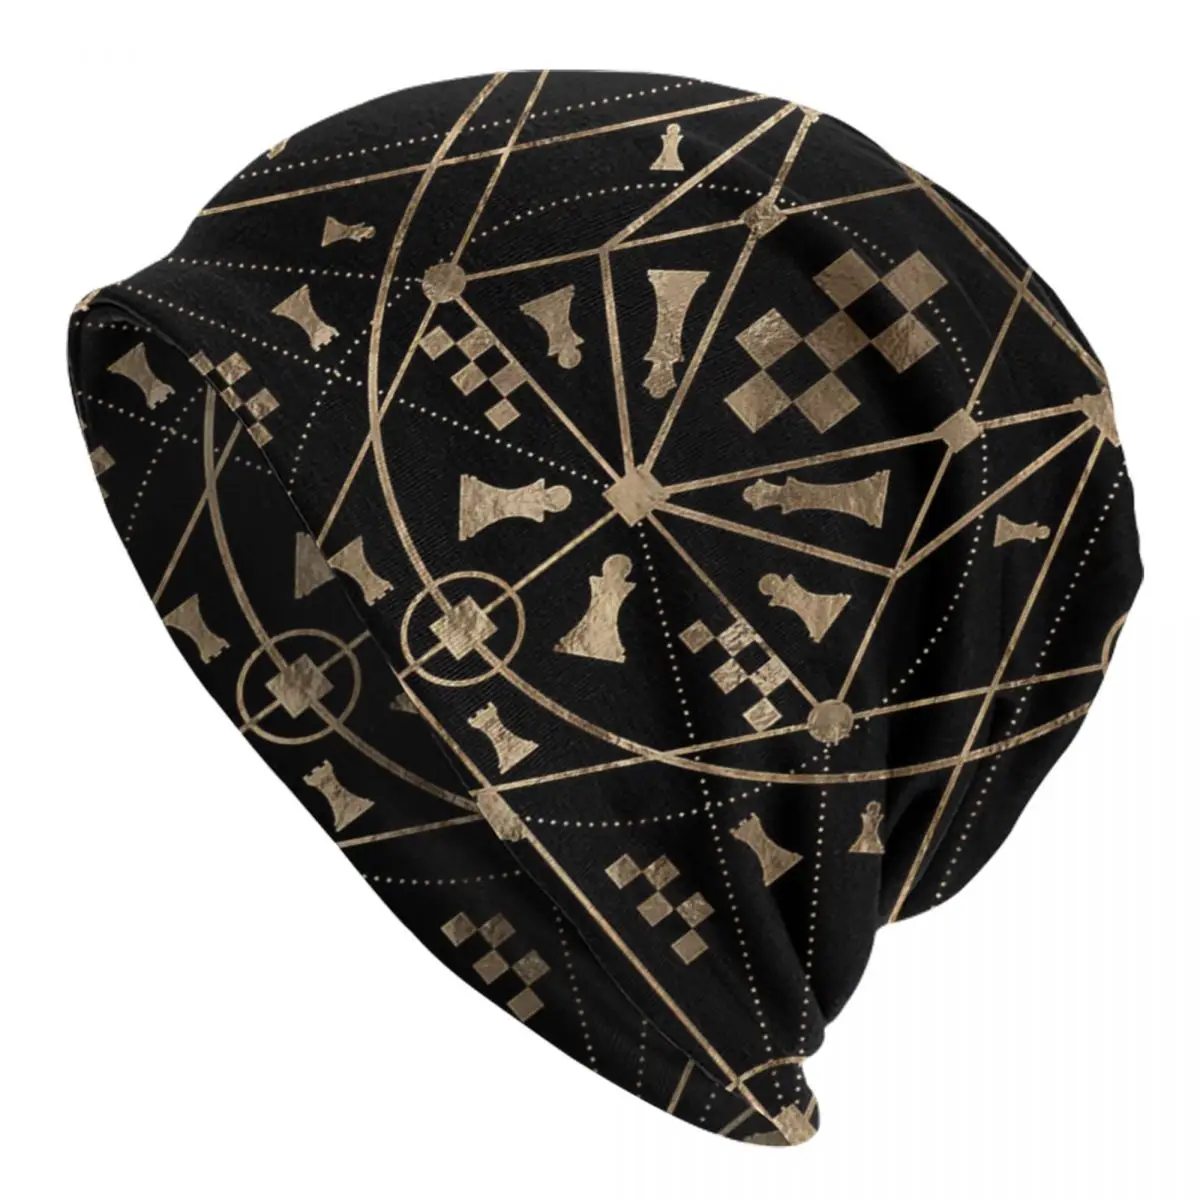 Sacred Geometry Ornament With Chess Pieces Adult Men's Women's Knit Hat Keep warm winter knitted hat